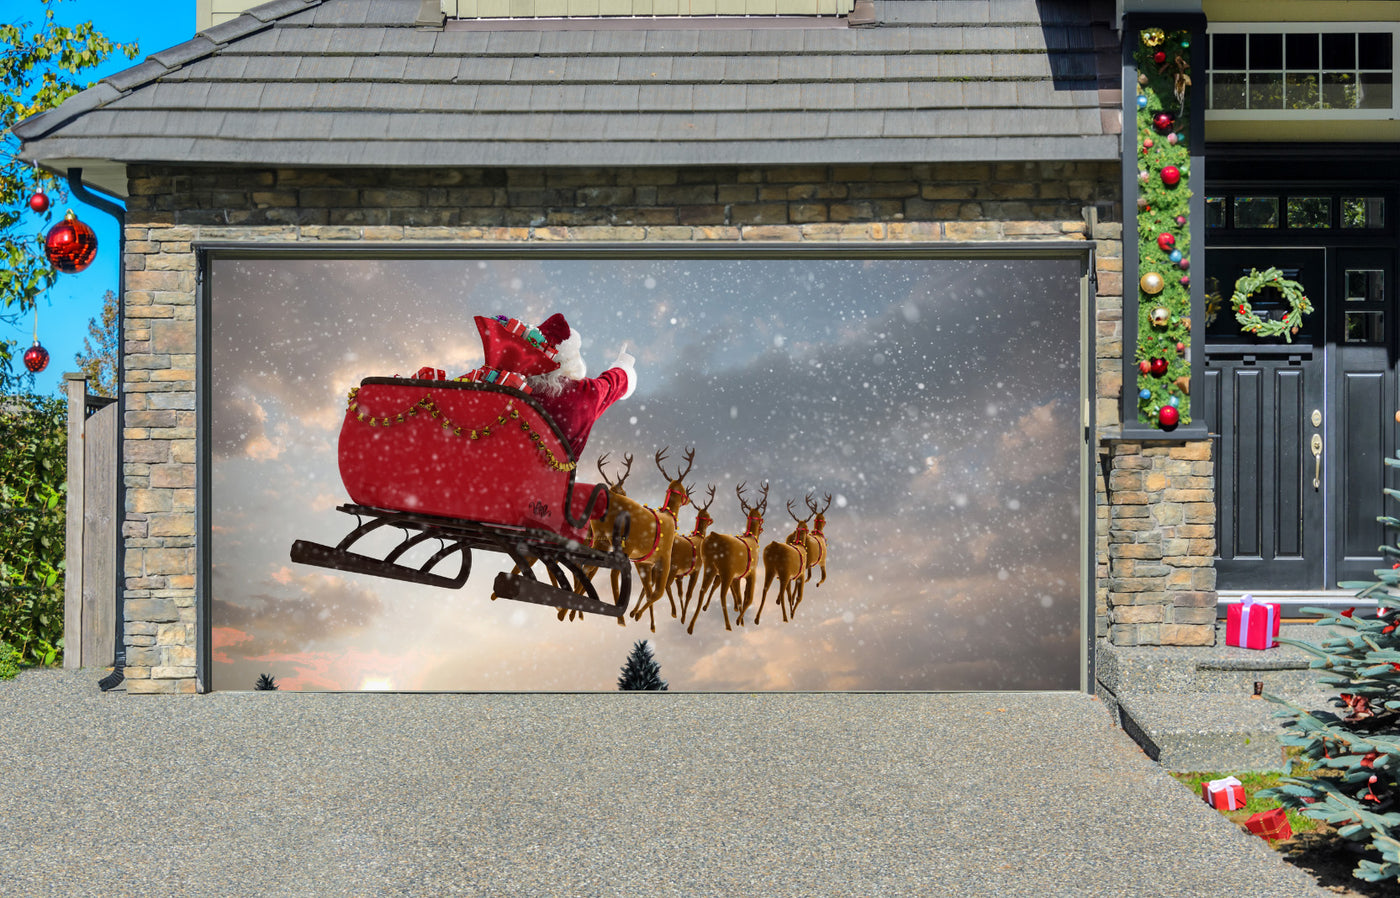 Santa Claus Riding On Sleigh With Gift Box Garage Door Cover Wrap Christmas Banner